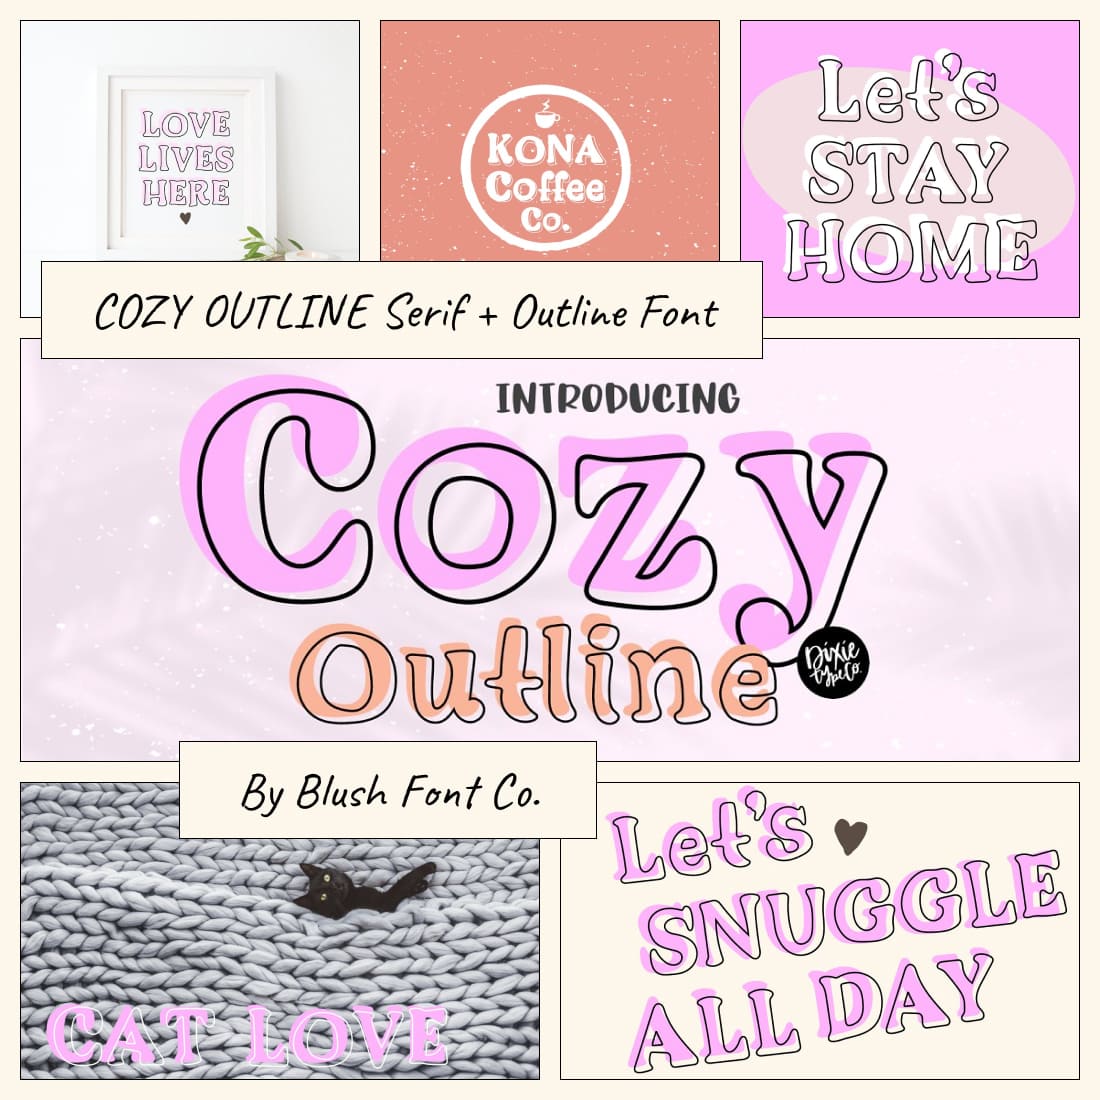 Introducing Cozy Outline - "Love Lives Here".